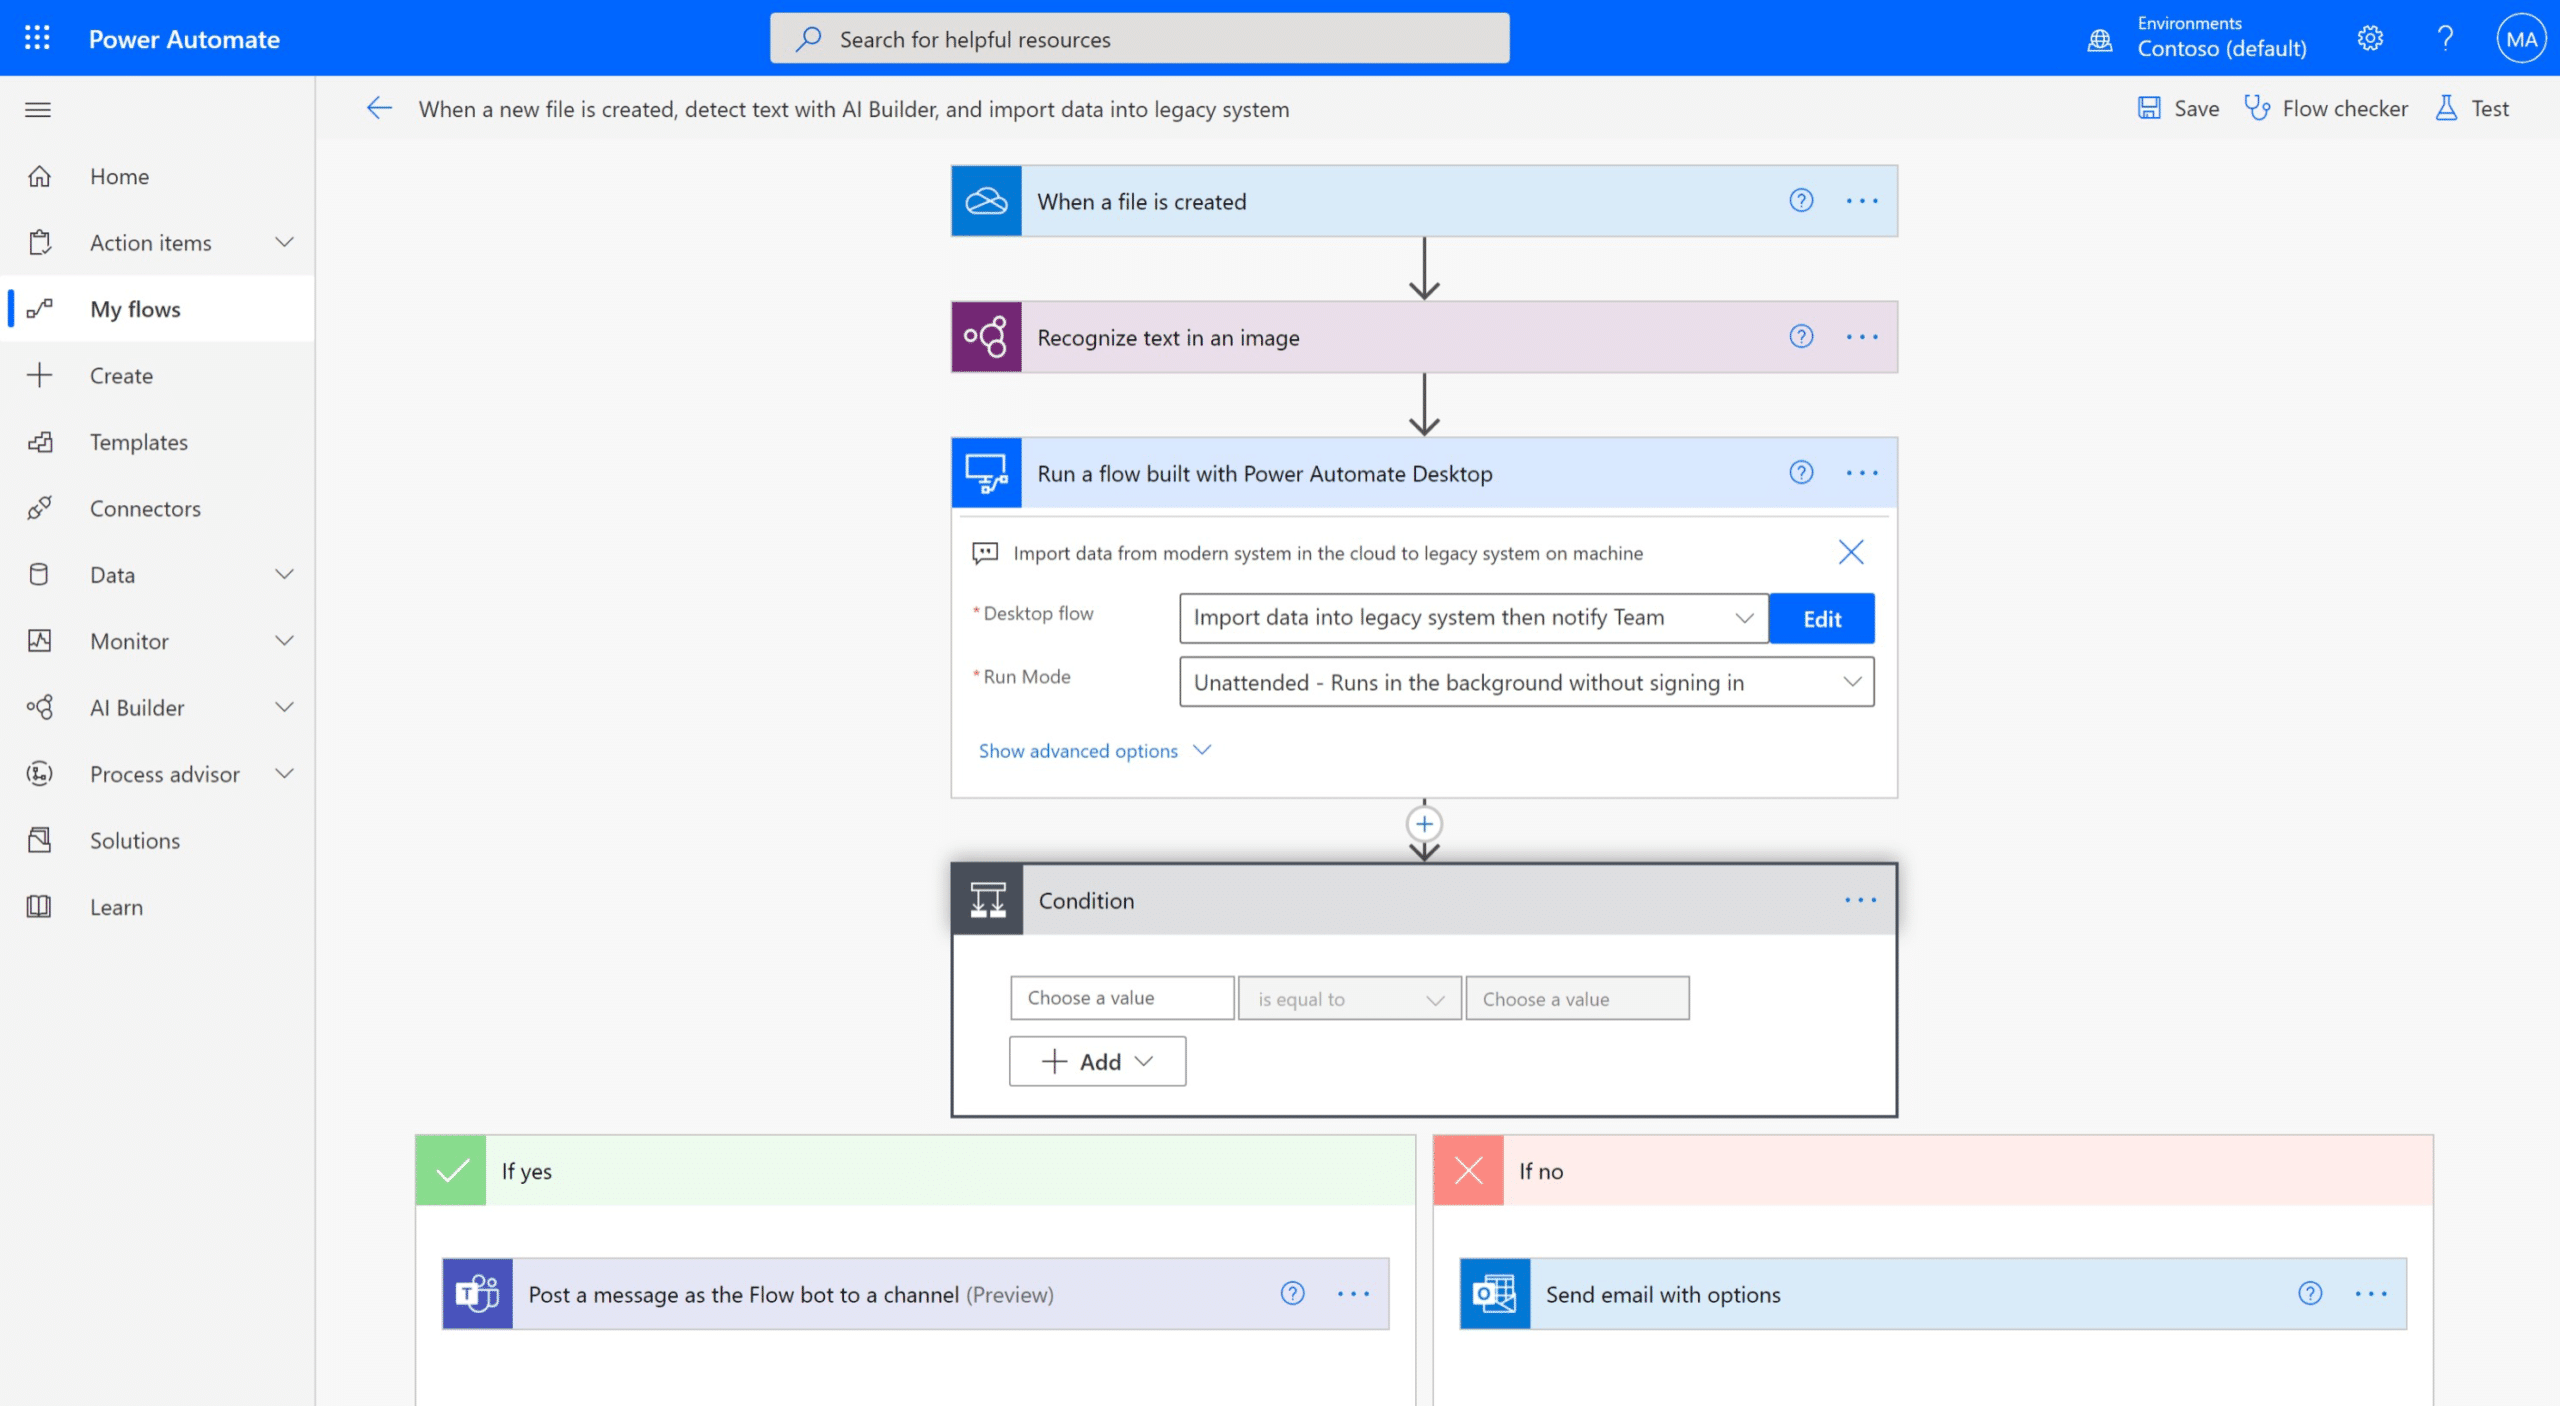 Any of the desktop flows you create can be run manually, triggered to run on a schedule, or from within a cloud flow as seen here. By triggering desktop flows within your cloud flows, you expand the possibilities of automation across your organisation.